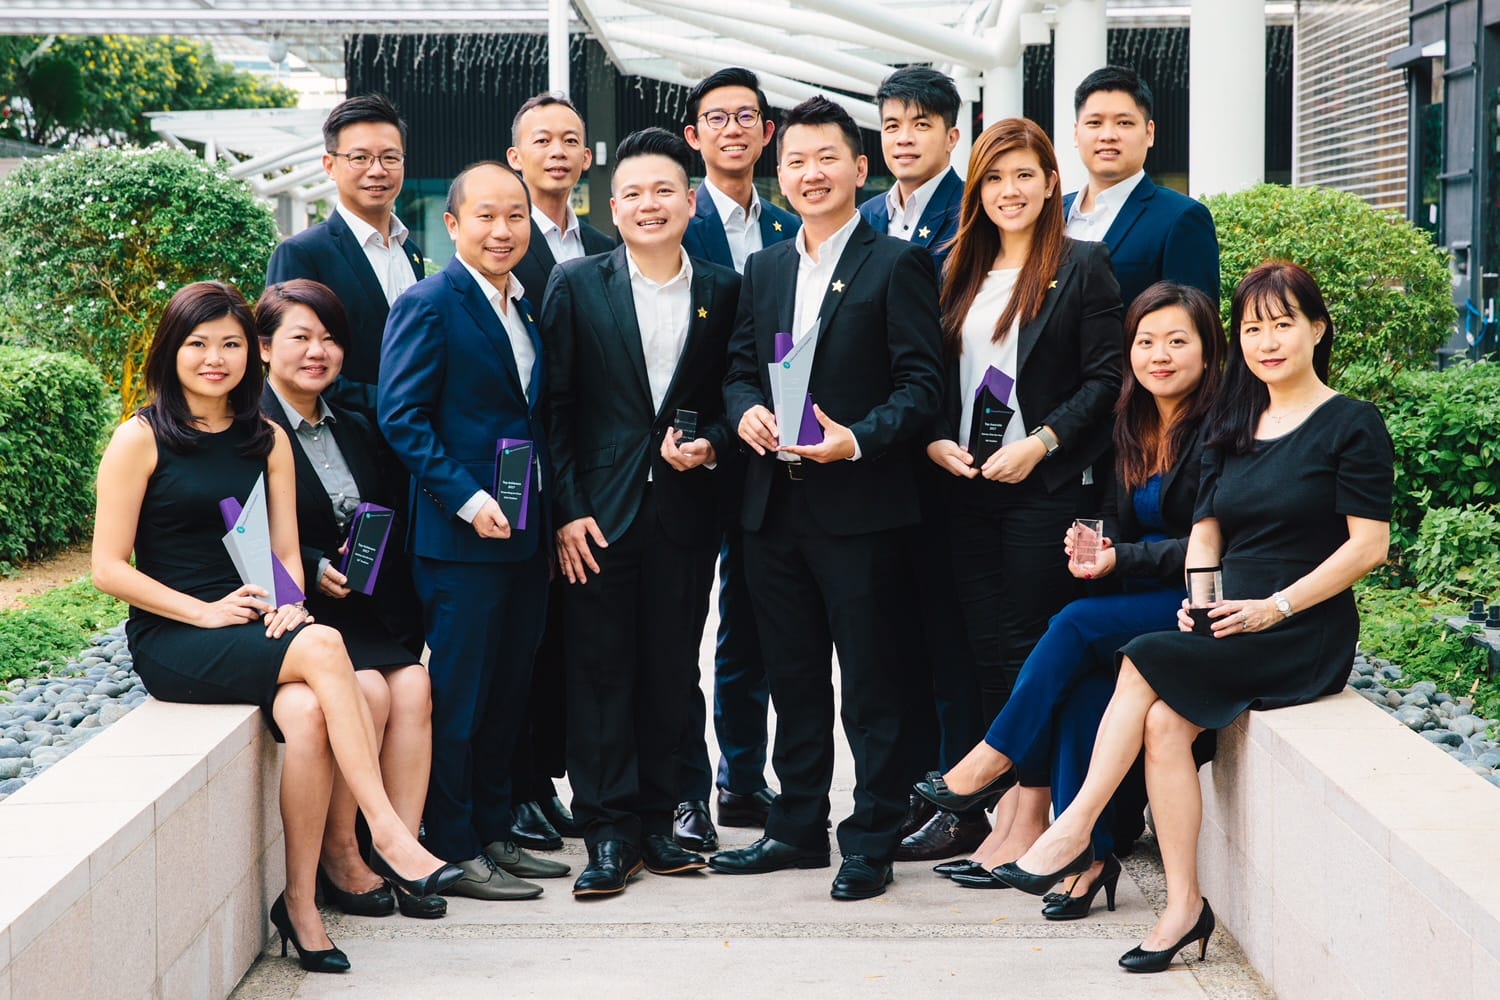 Clarence (last row, middle), together with his colleagues. At a company-wide talk, he urged his colleagues to rethink their definition of success. He quoted Cullen Hightower, who said: "A good measure of your worth includes the benefits others have gained from your success."